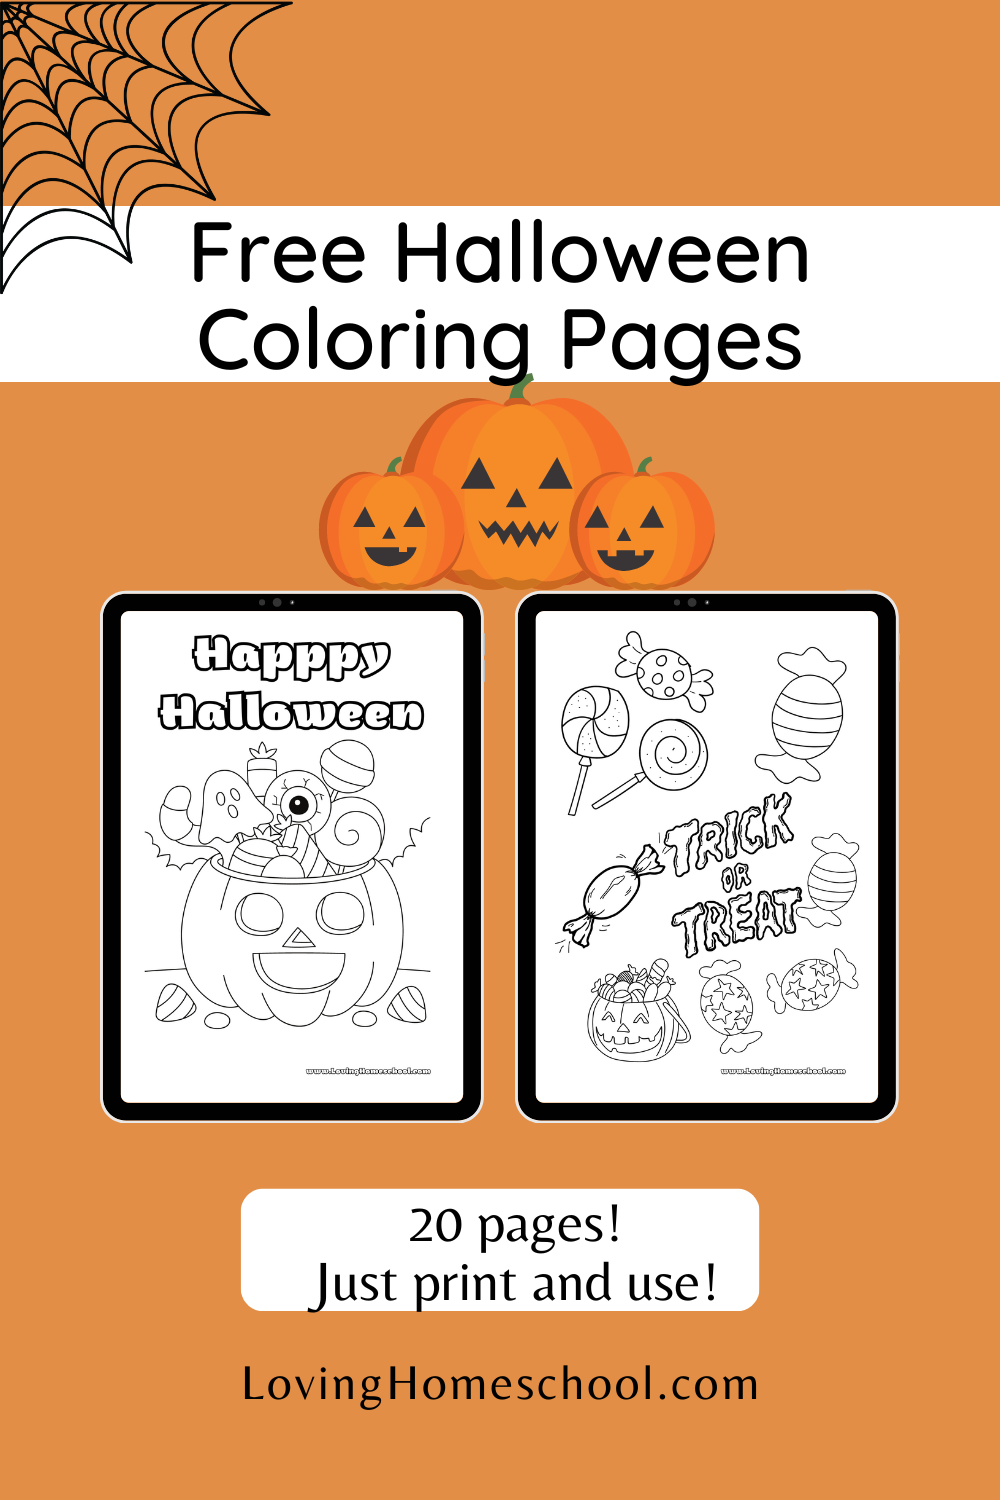 Halloween Coloring Pages Pinterest Pin